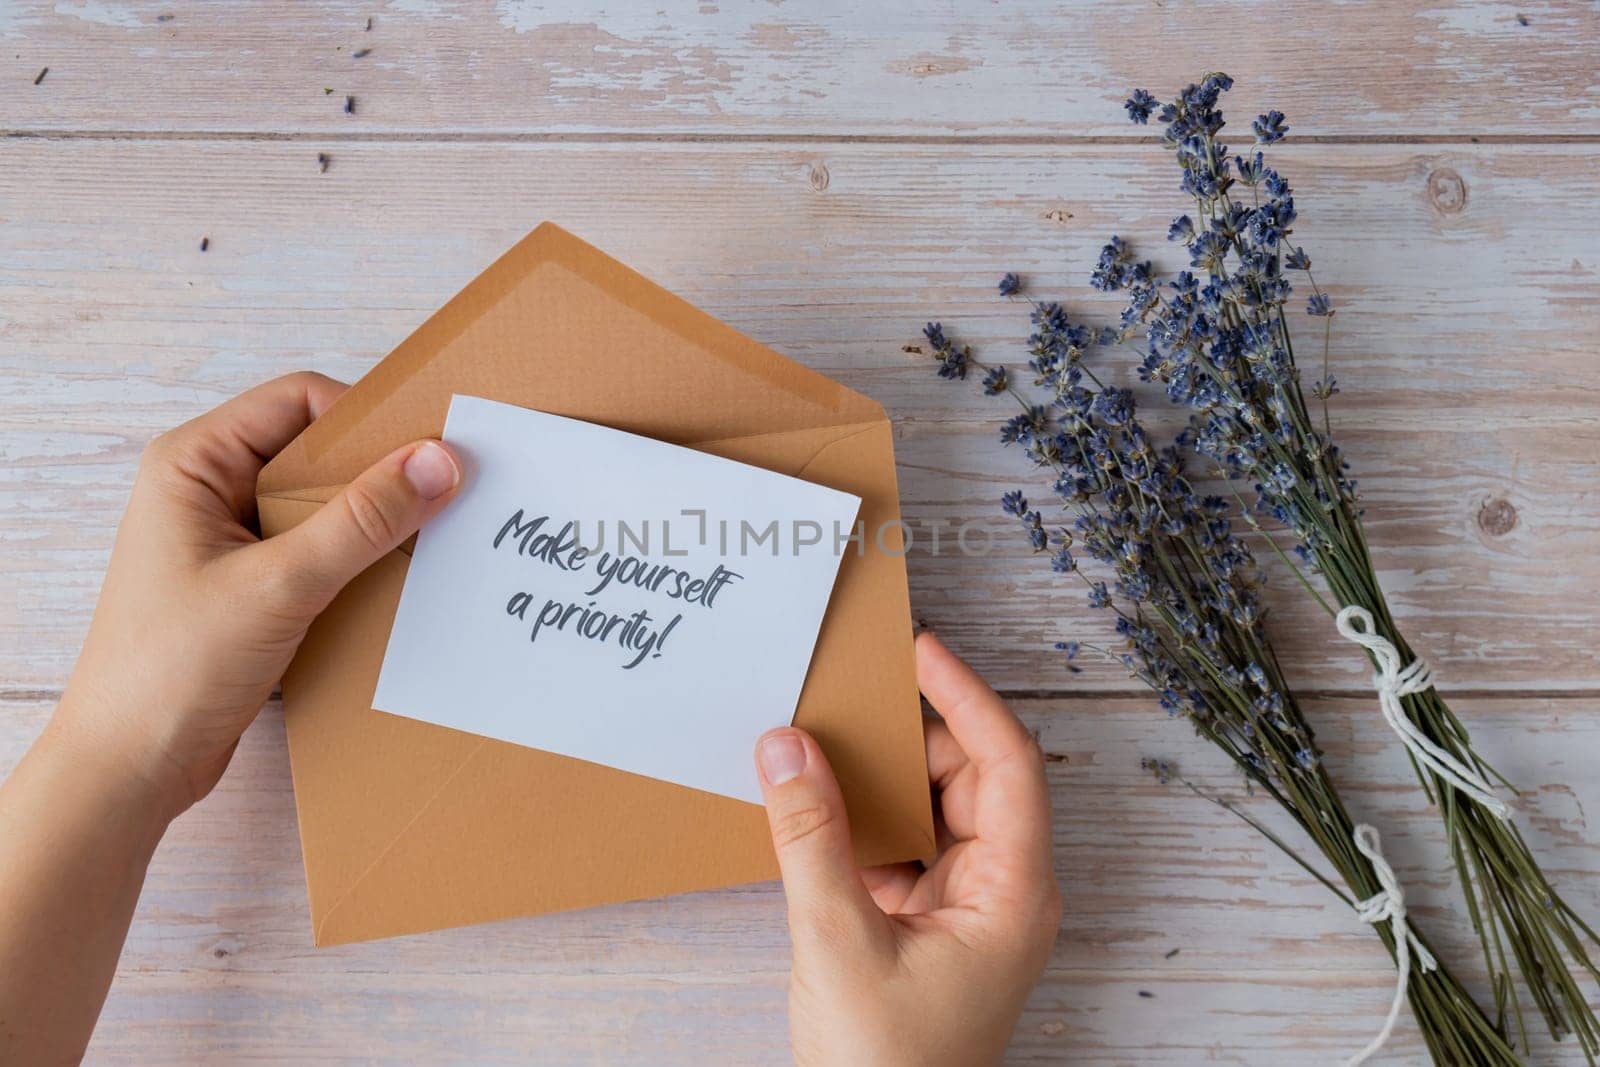 MAKE YOURSELF A PRIORITY text on supportive message paper note reminder from beige envelope. Flat lay composition dry lavender flowers. Concept of inner happiness, slowing-down digital detox personal fulfillment. Top view